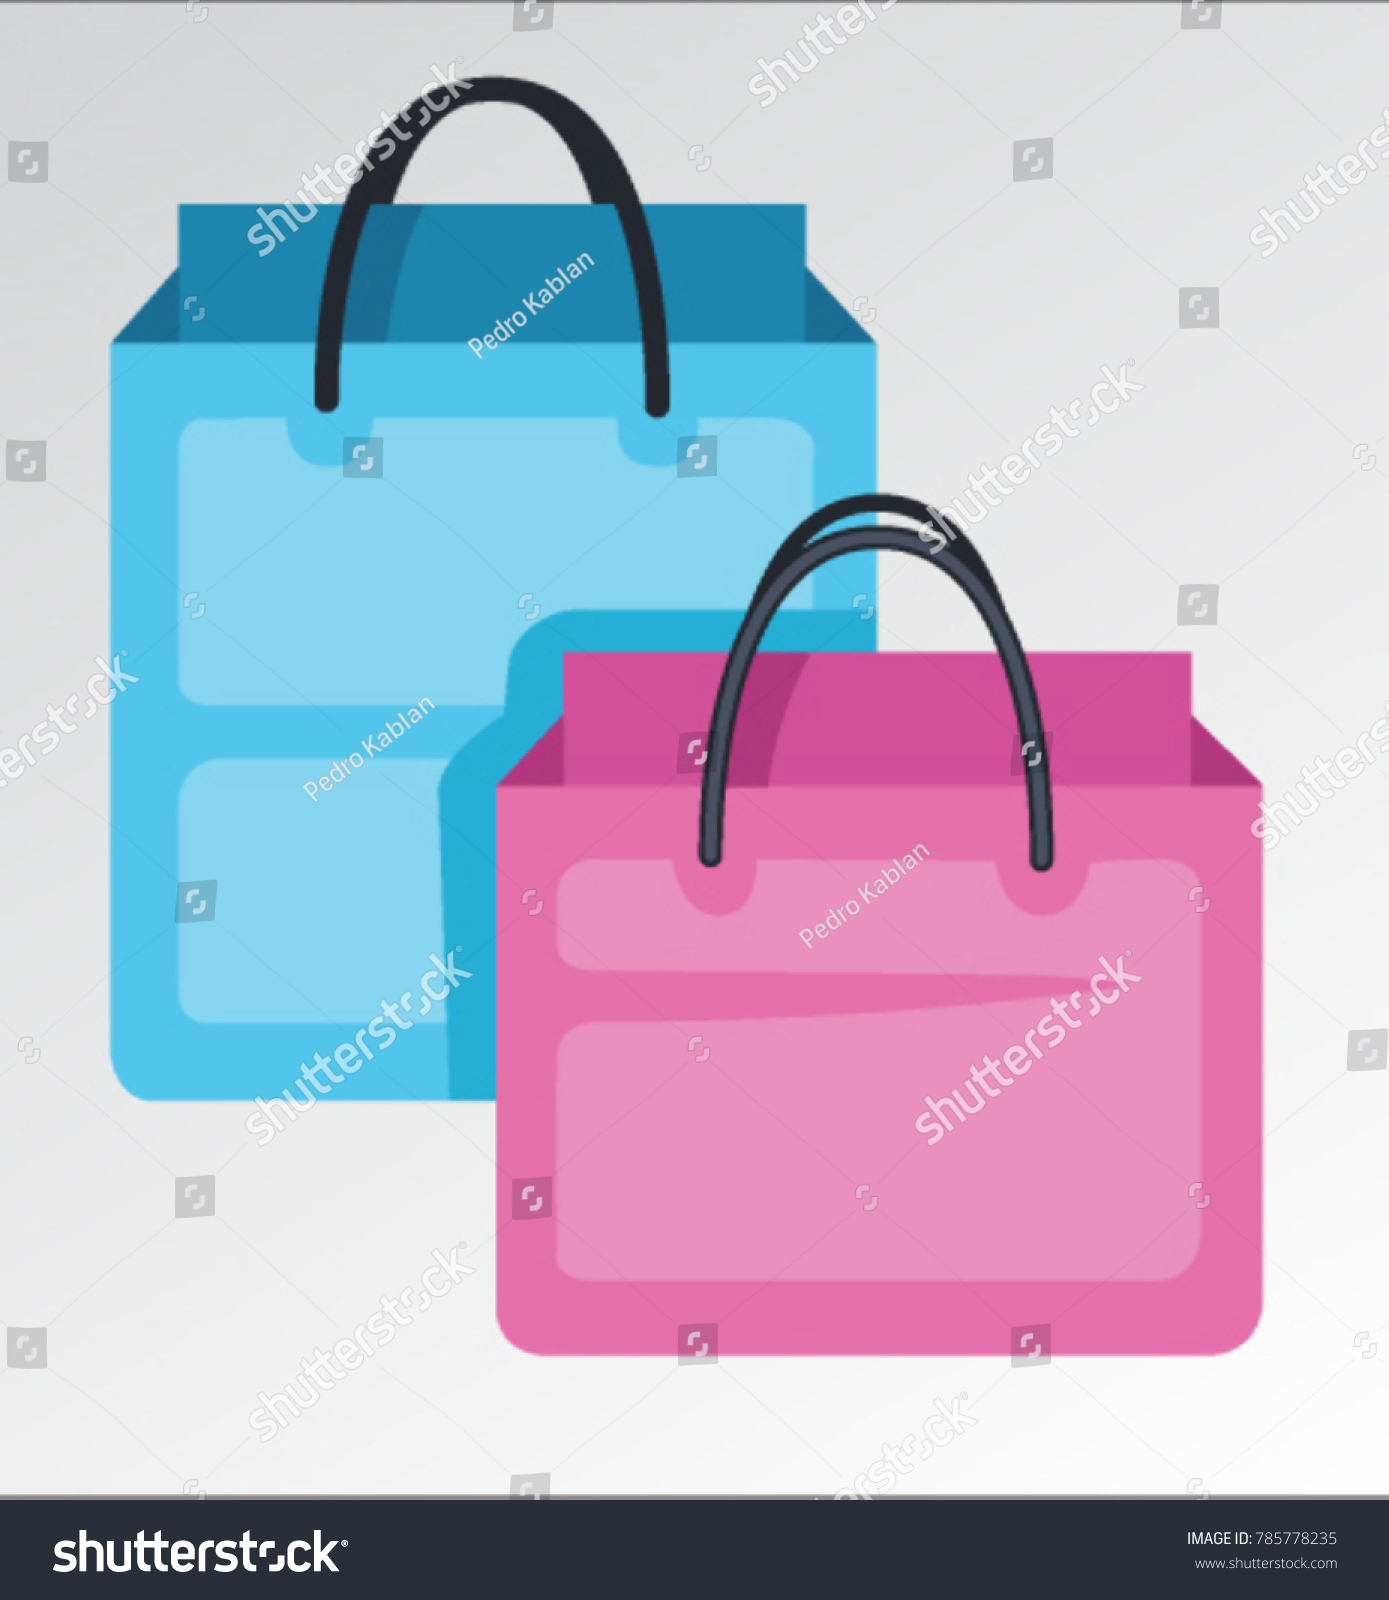 SVG of Vector about shopping bags. Inspired by popular emoji. svg